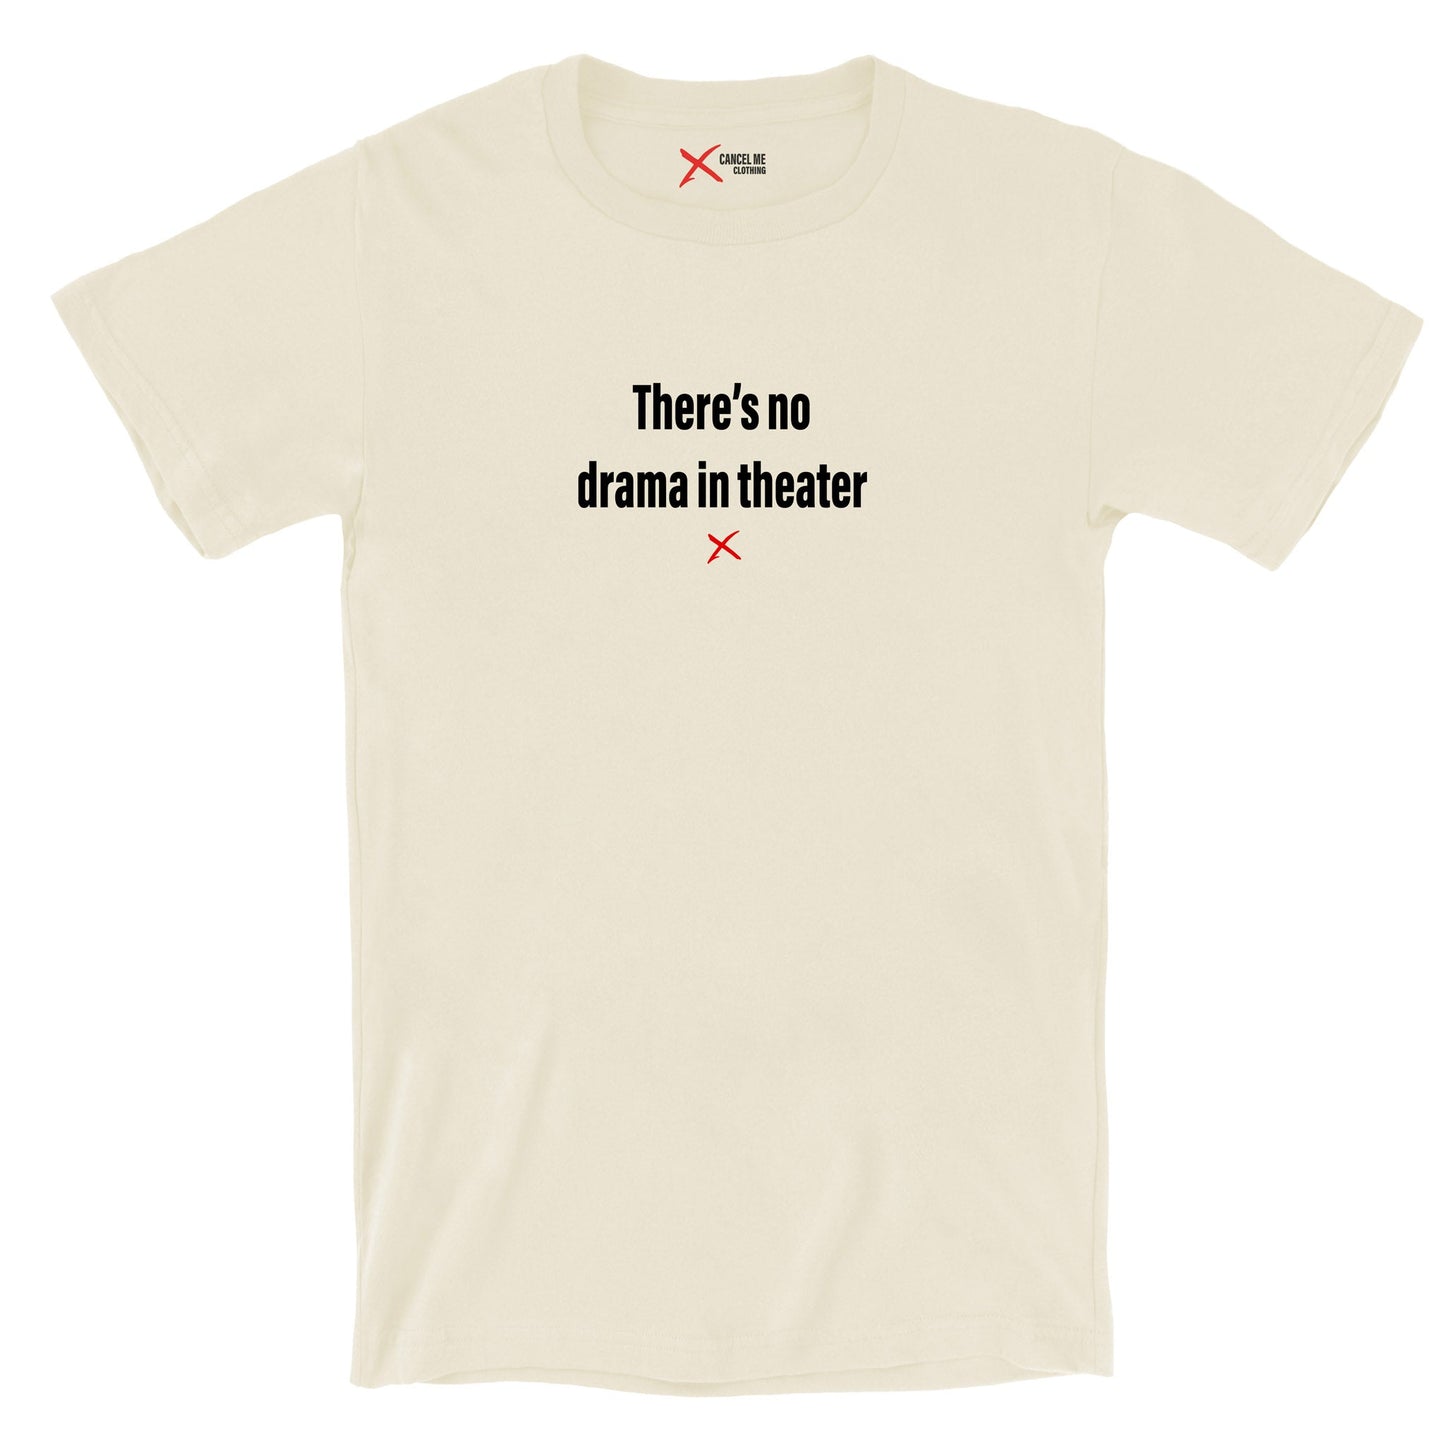 There's no drama in theater - Shirt